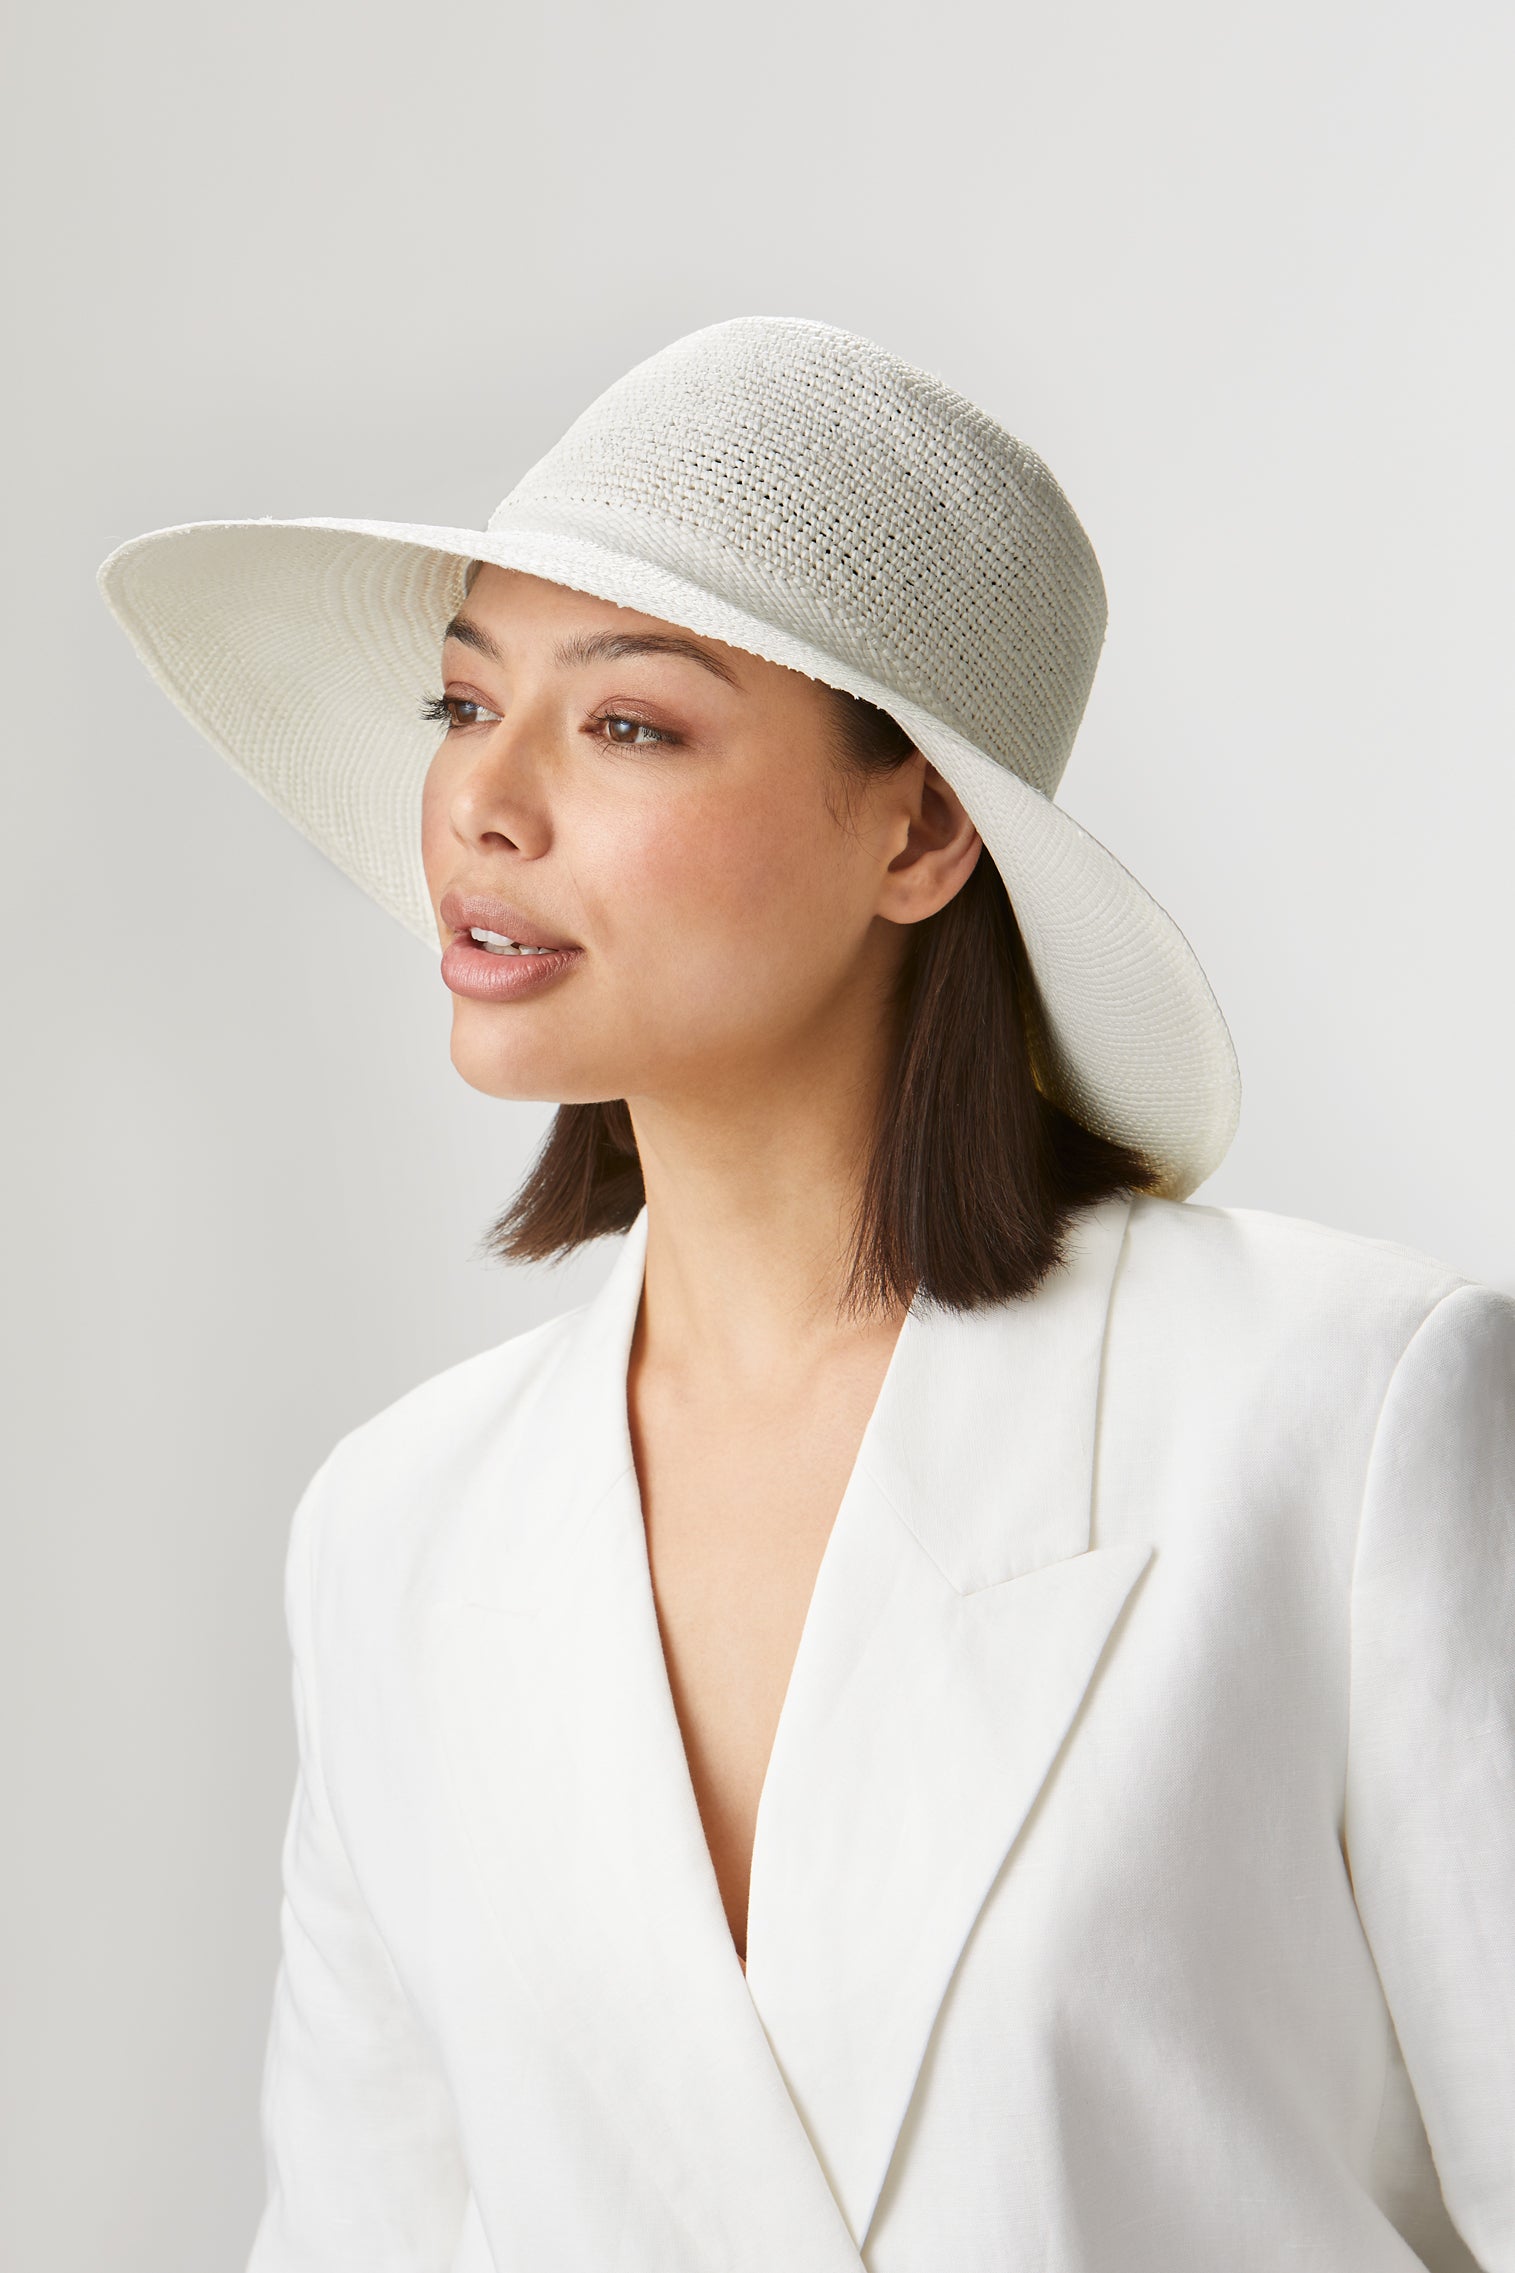 Lucille Sun Hat - Panamas, Straw and Sun Hats for Women - Lock & Co. Hatters London UK